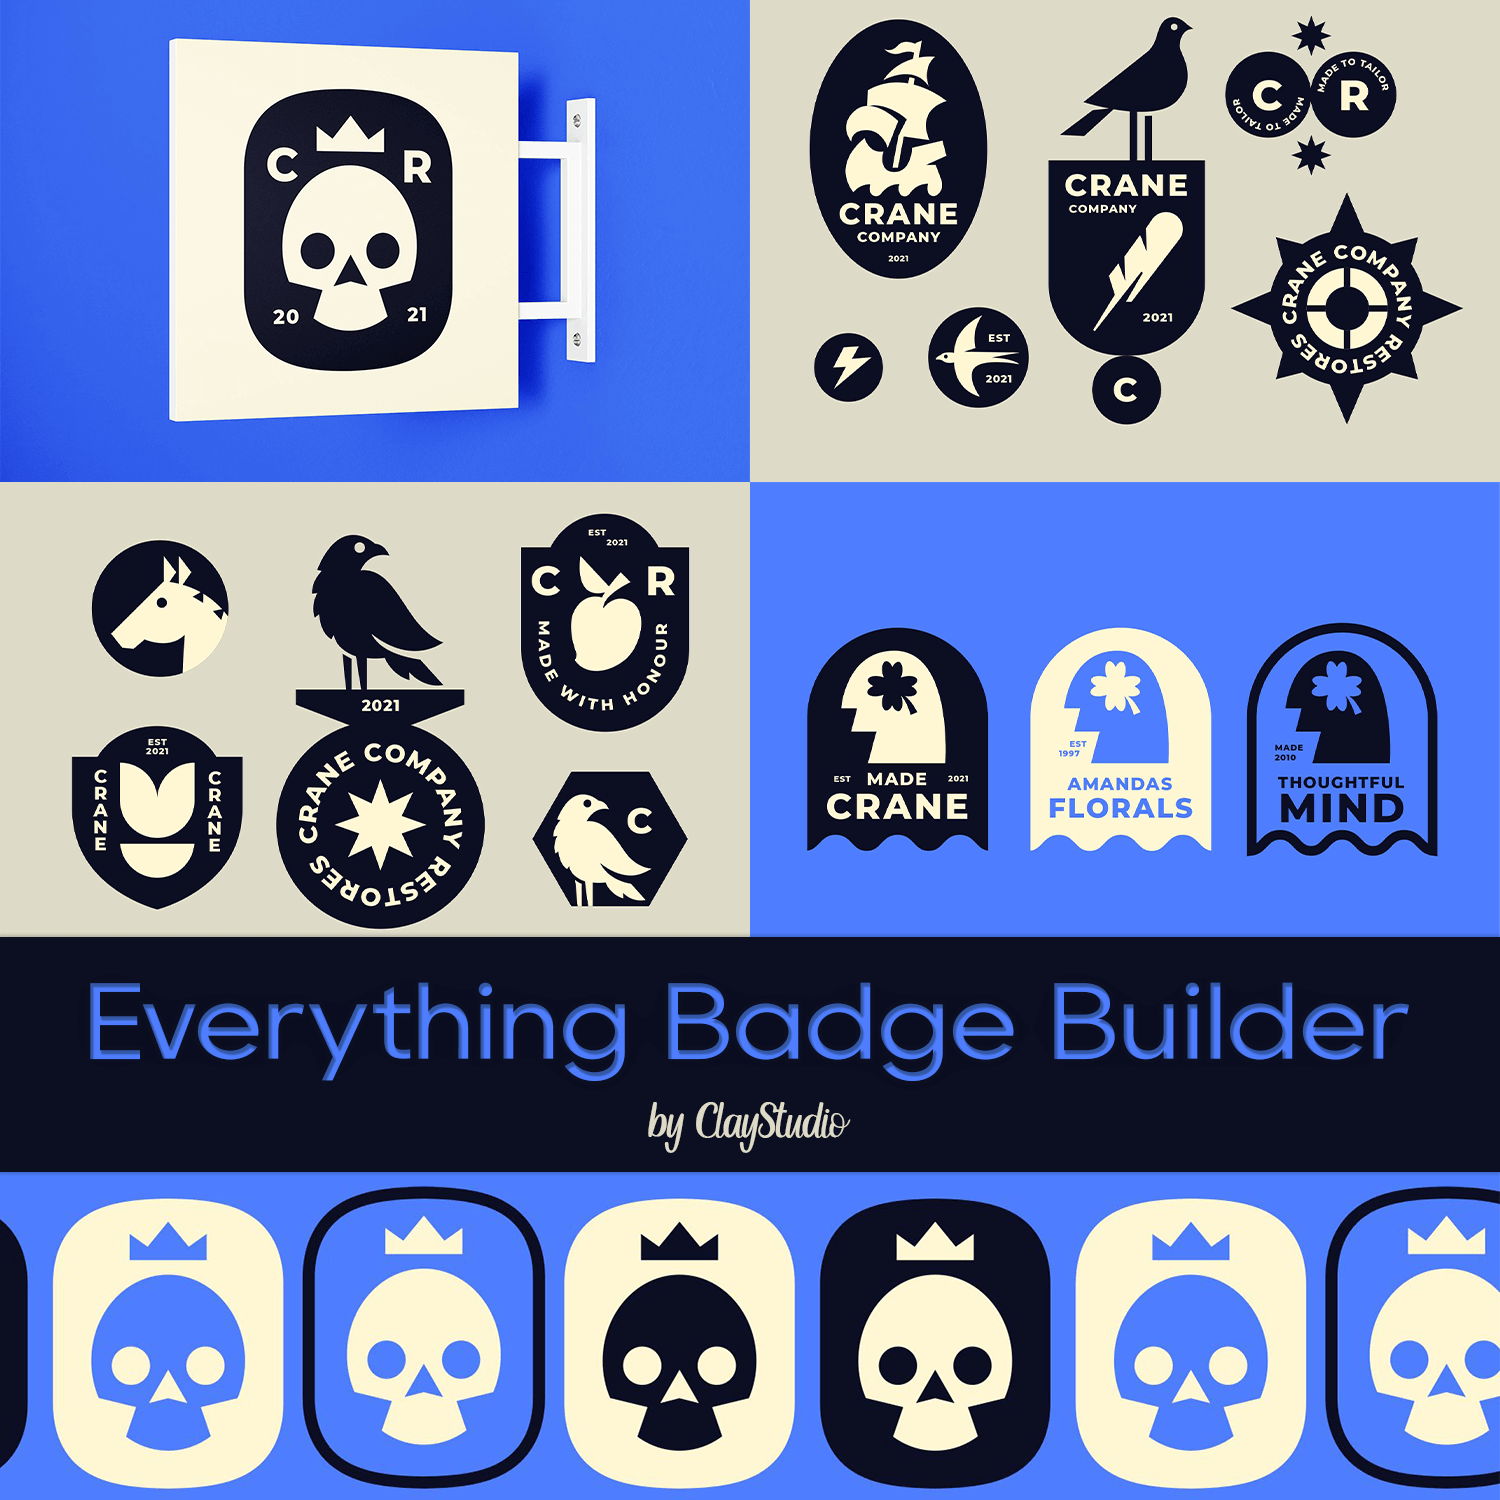 Many slides with different badges.